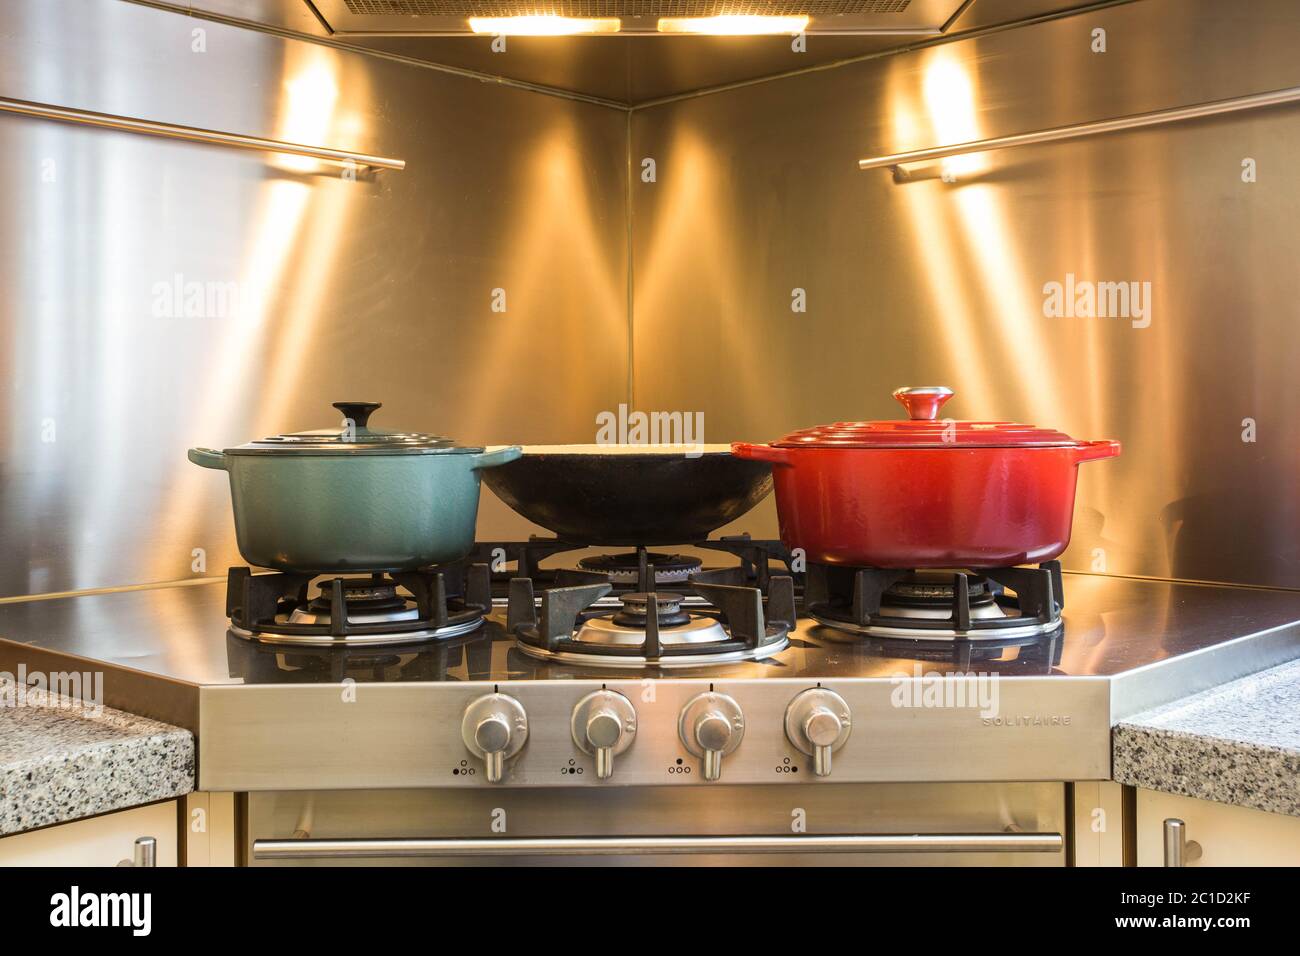 https://c8.alamy.com/comp/2C1D2KF/elegant-kitchen-for-workshop-cooking-in-hotel-have-a-equipment-luxury-and-closeup-pot-on-the-gas-stove-which-has-fire-2C1D2KF.jpg